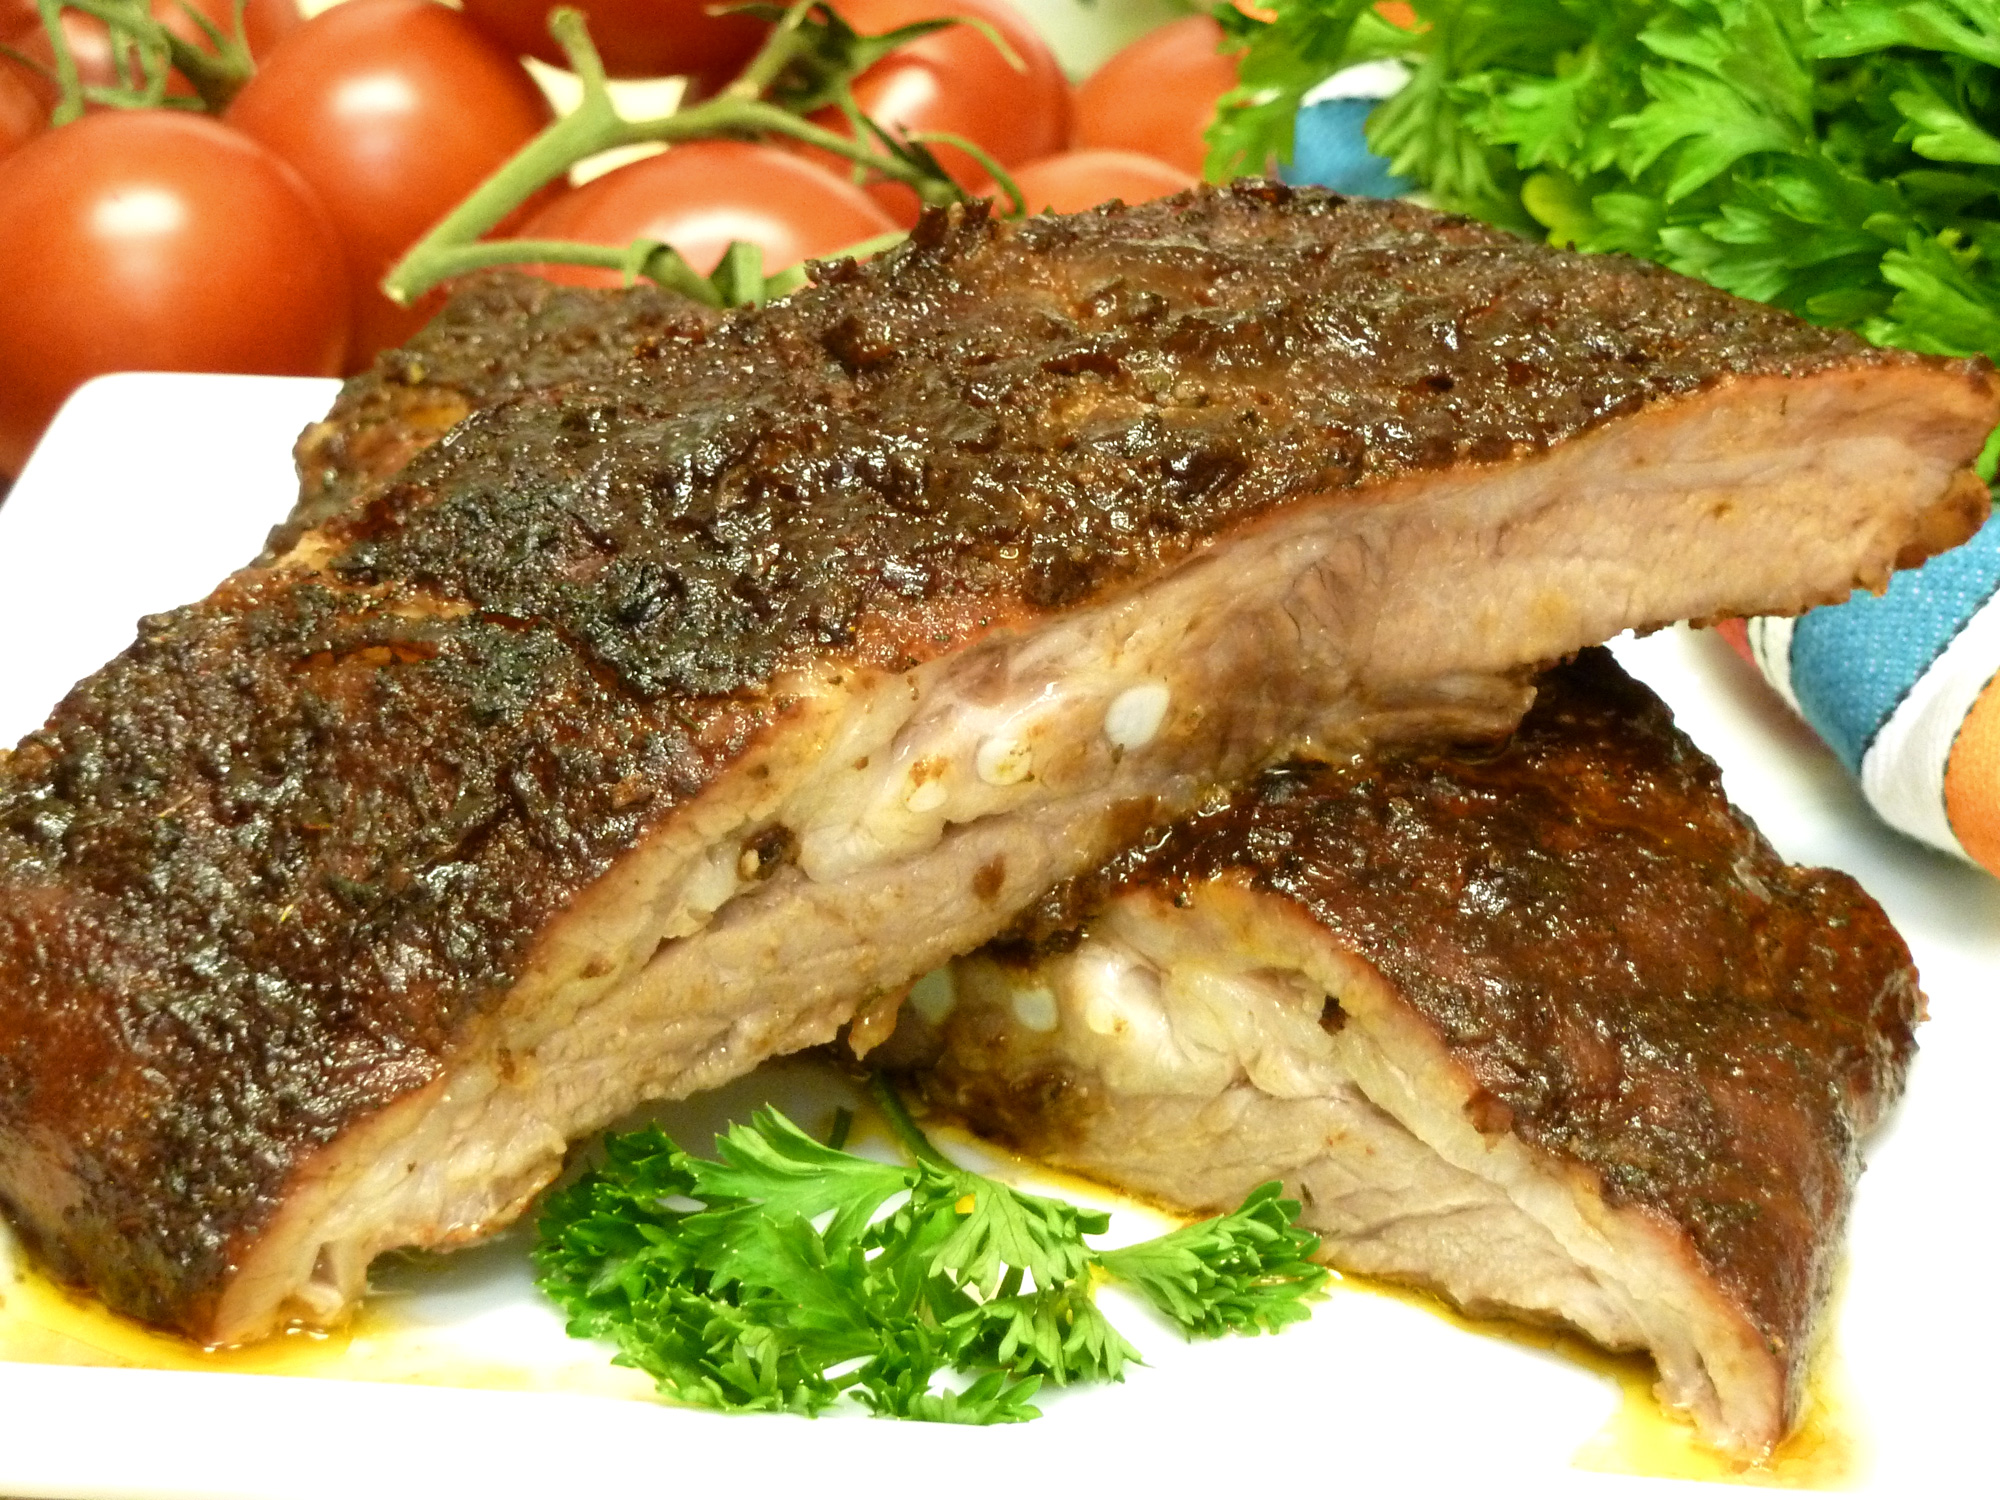 Homemade pomegranate BBQ sauce tops easy spareribs made in the oven.